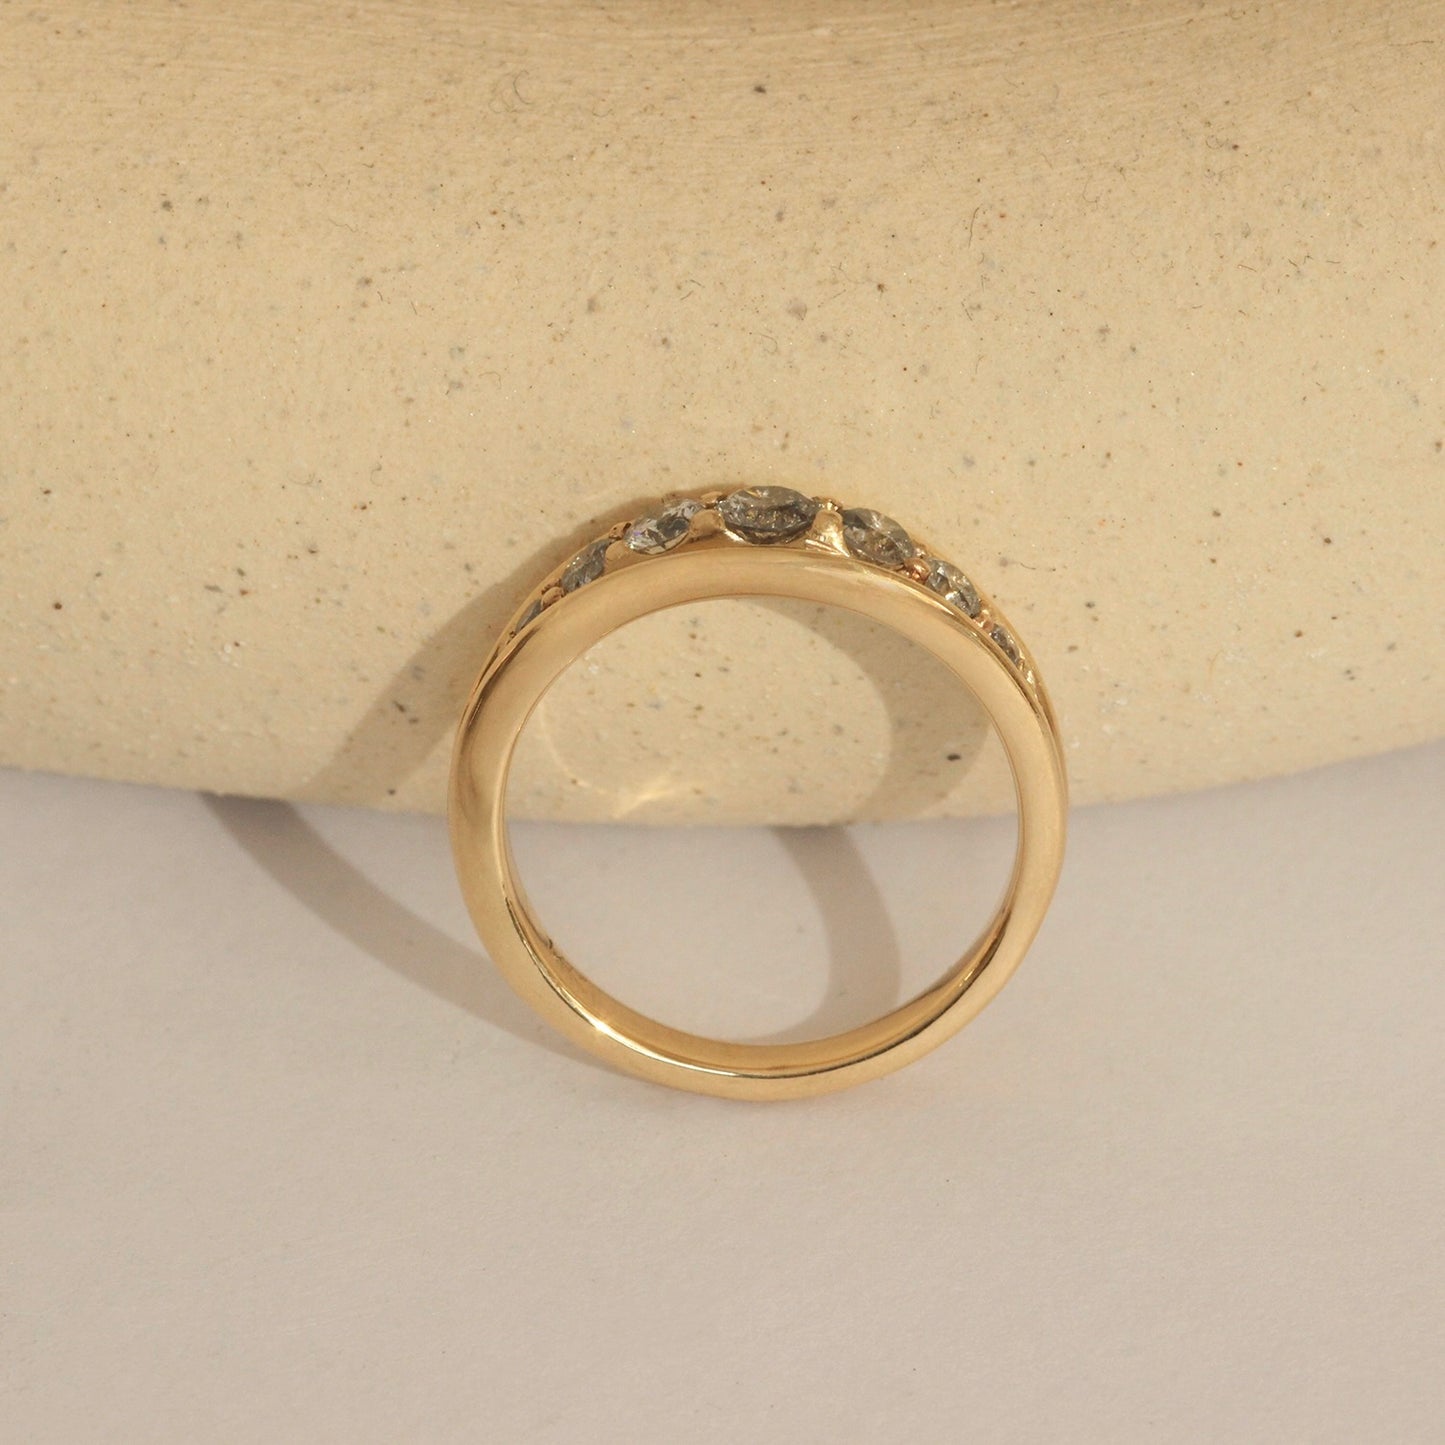 Cornice Ring / Tapered Wide + Salt & Pepper Diamonds by Goldpoint